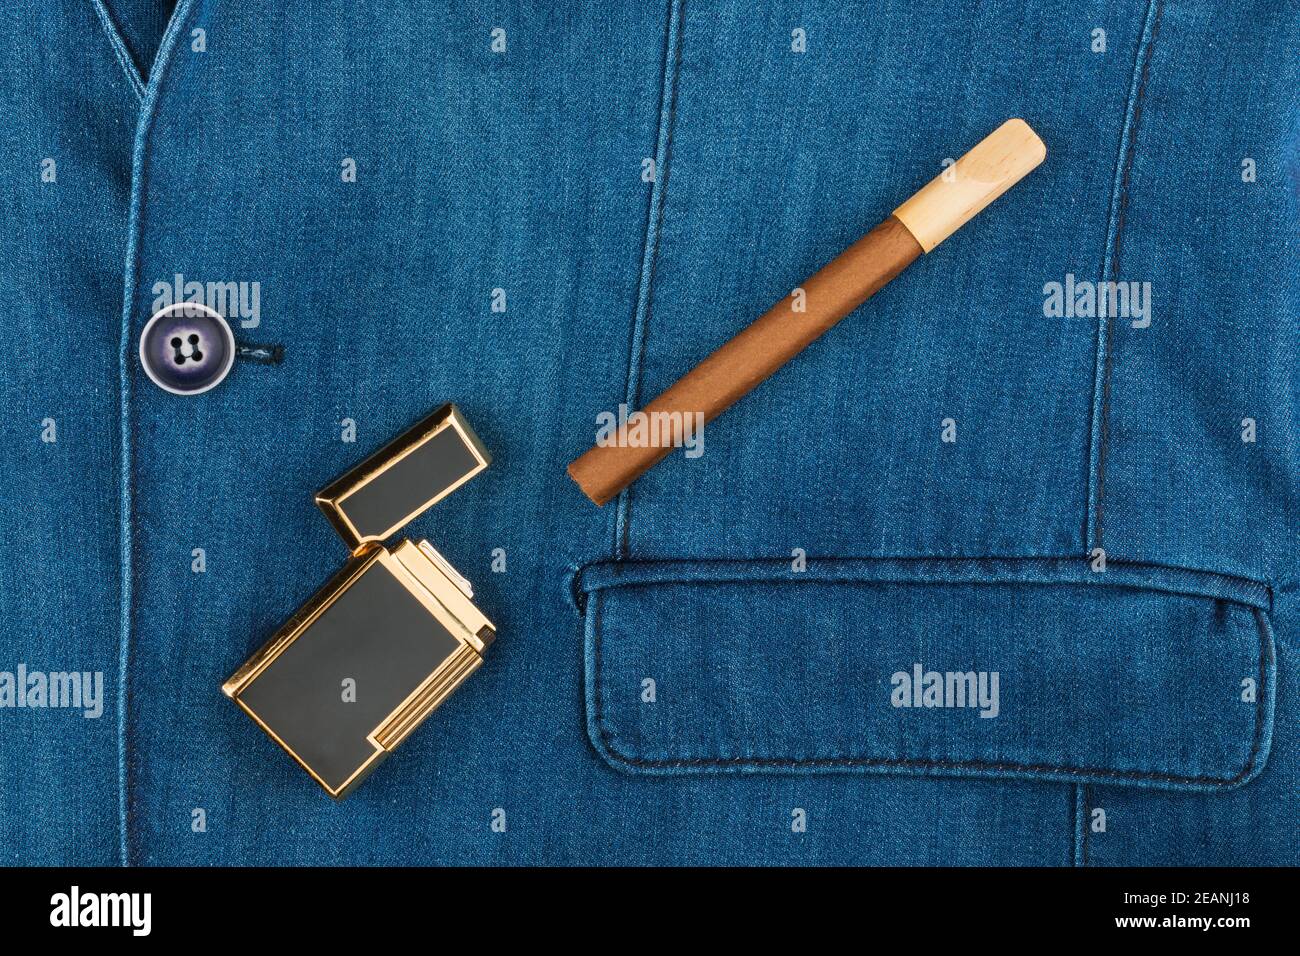 Cigar and lighter lying on a blue denim jacket Stock Photo